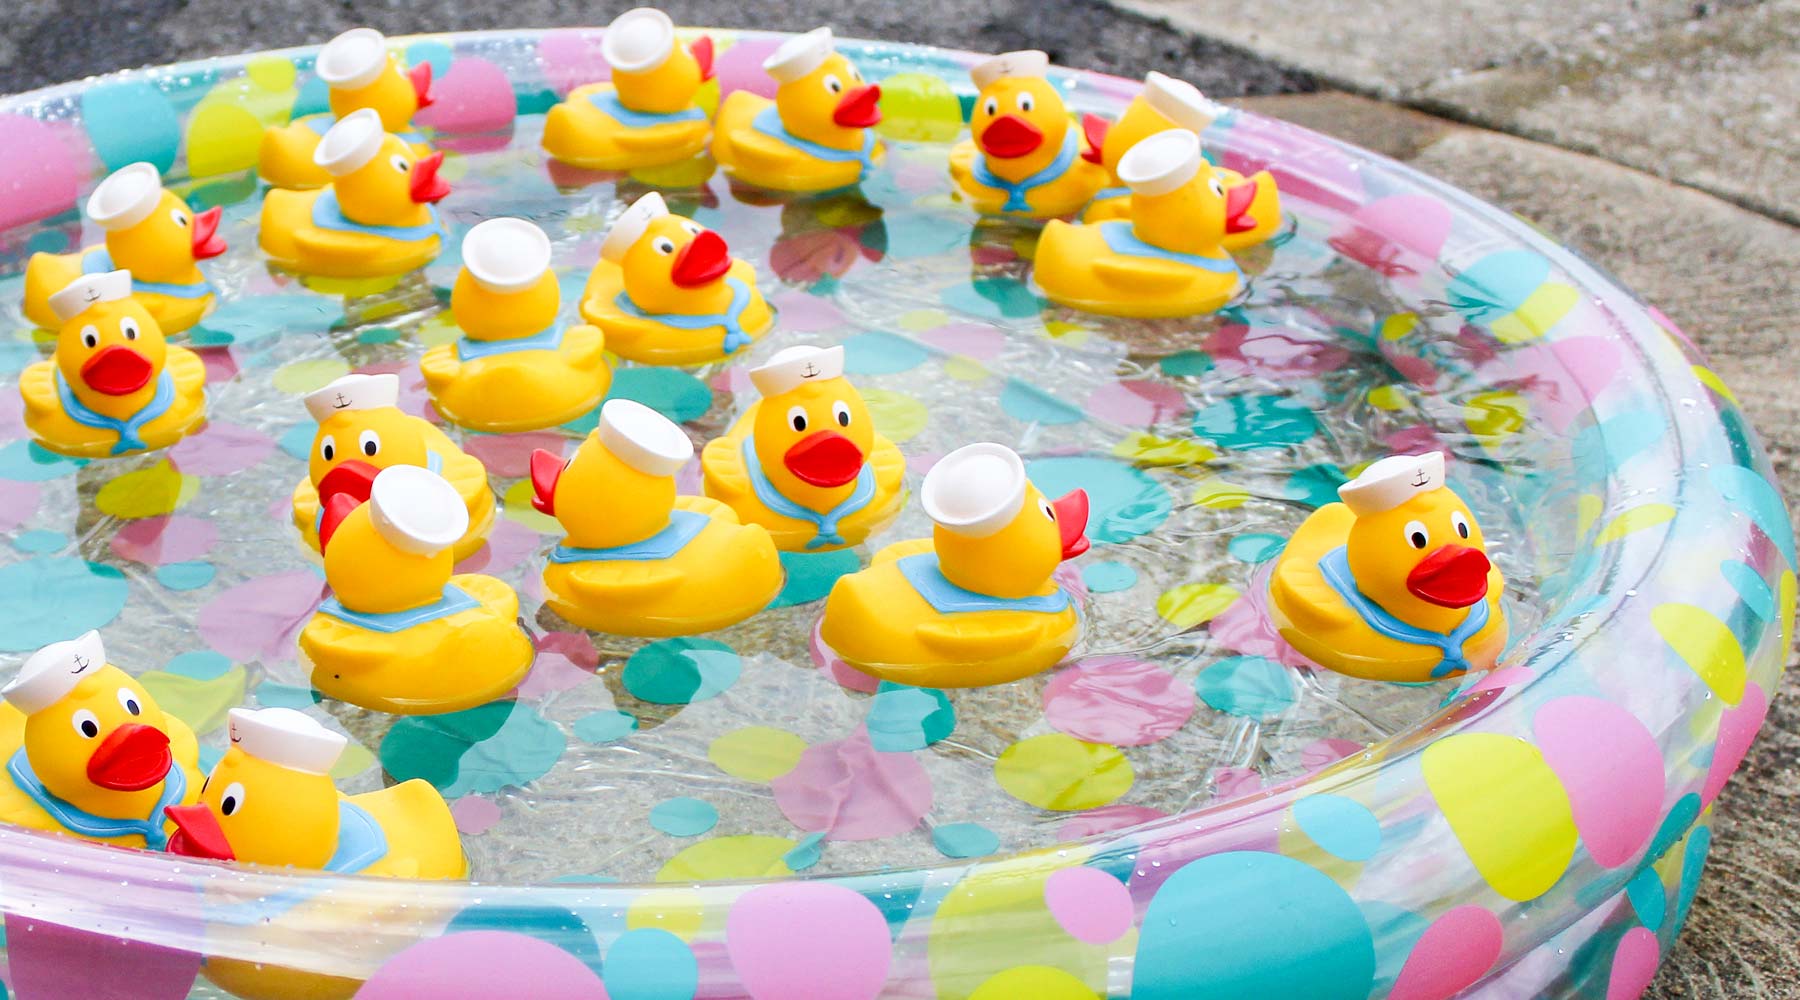 Free Photo  Toy duck fishing game with colorful toy ducks